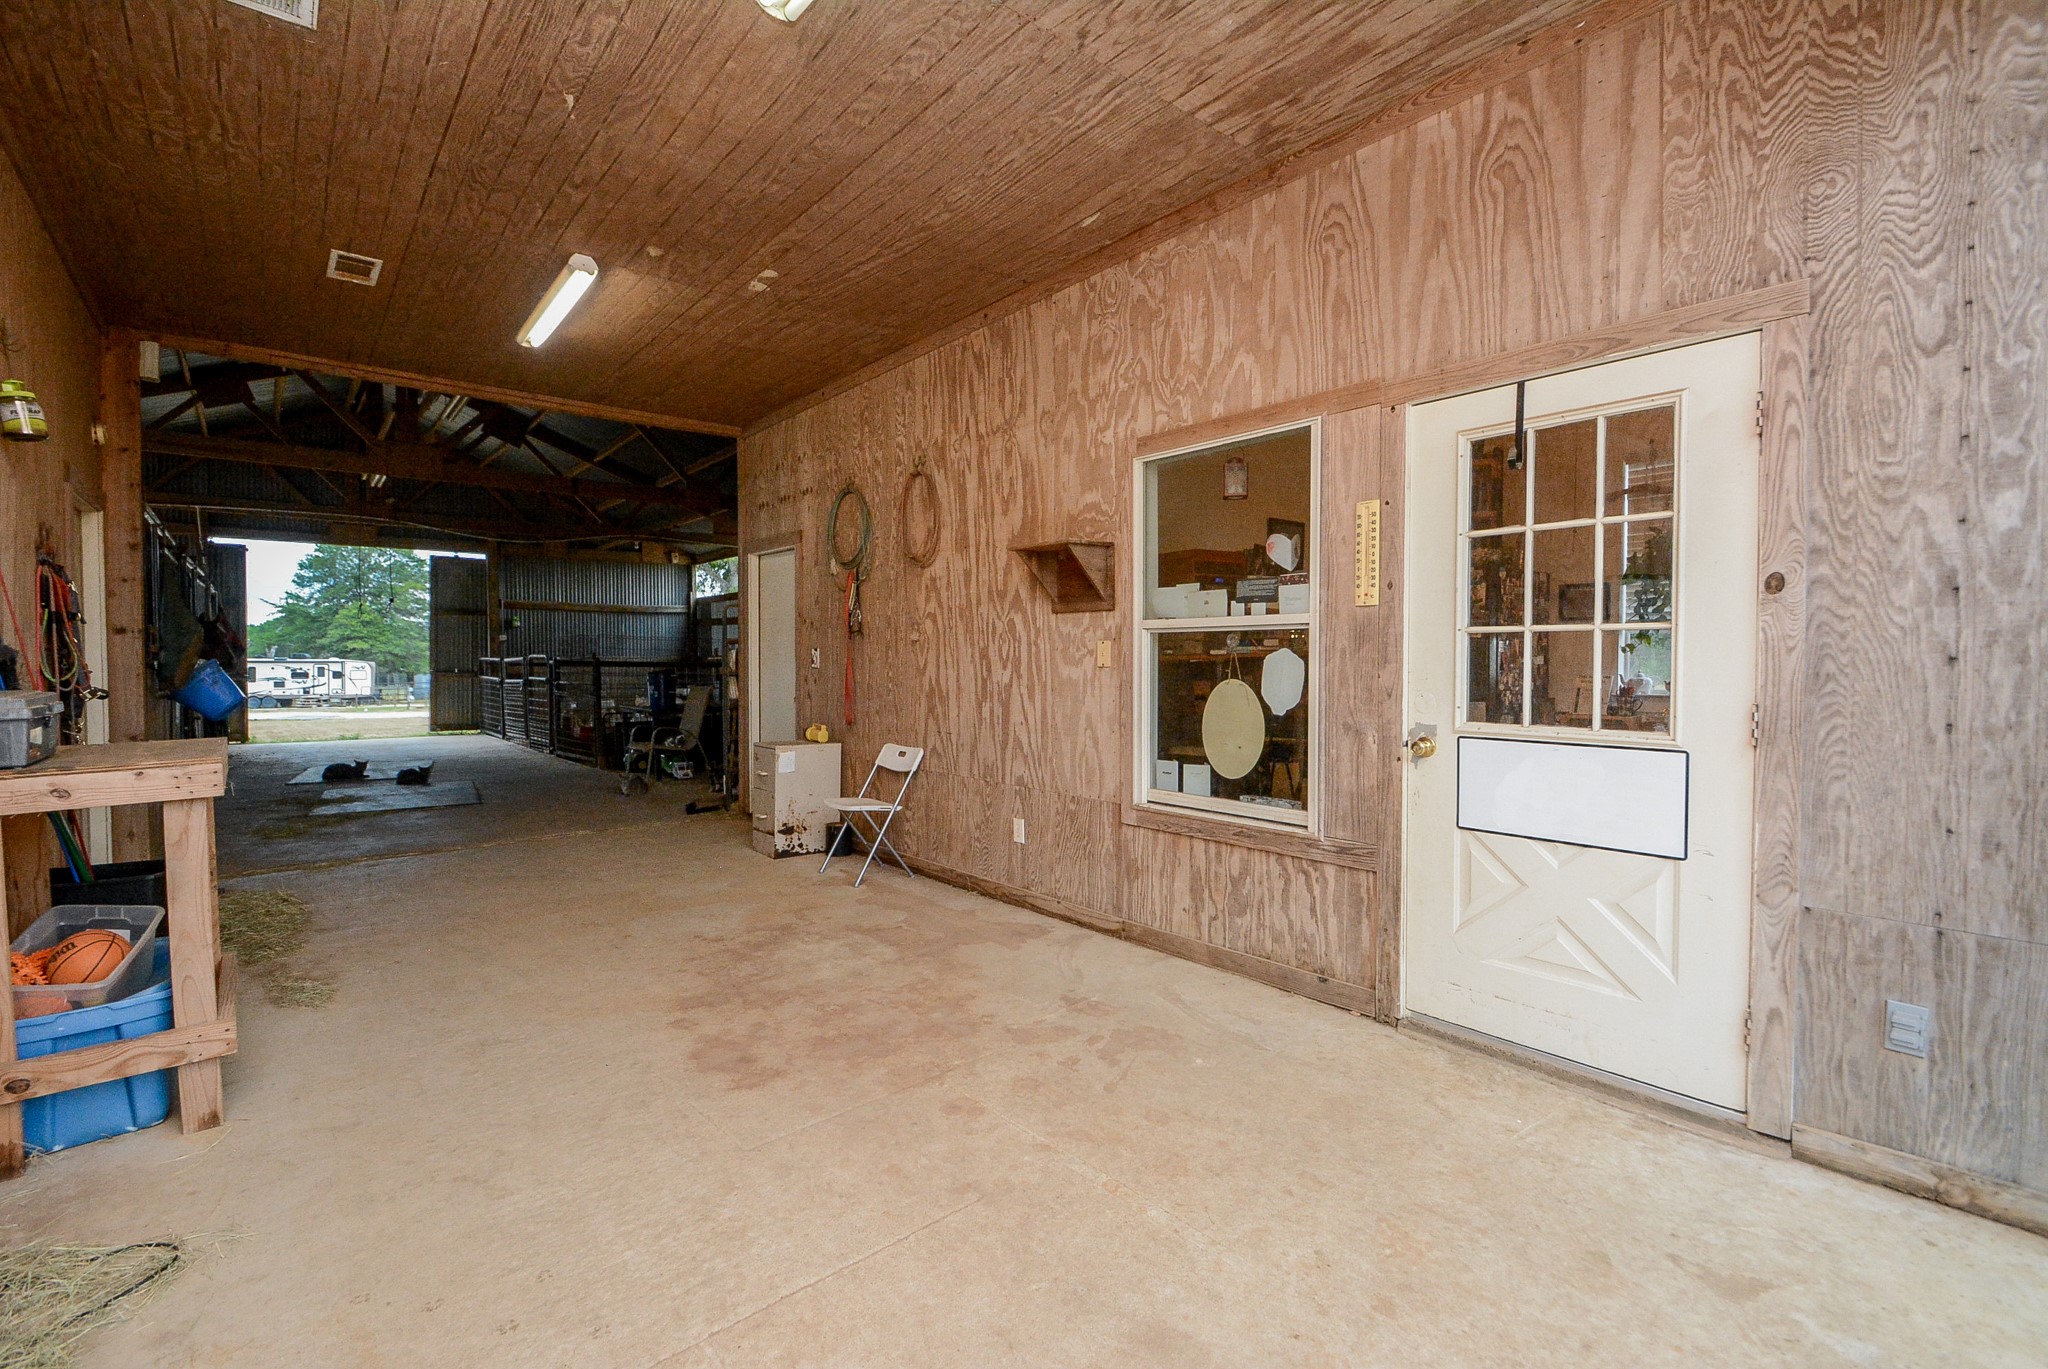 Inside the Barn/Stable are the Living Quarters. Behind the Half French Door is the 11x11 Kitchen with Upper & Lower Cabinets, Double Stainless Steel Sink, Electric Stove/Range, Refrigerator and Room for a Breakfast Table. The Room behind the Solid Door is the 11x11 Bedroom. Both Rooms have A/C.